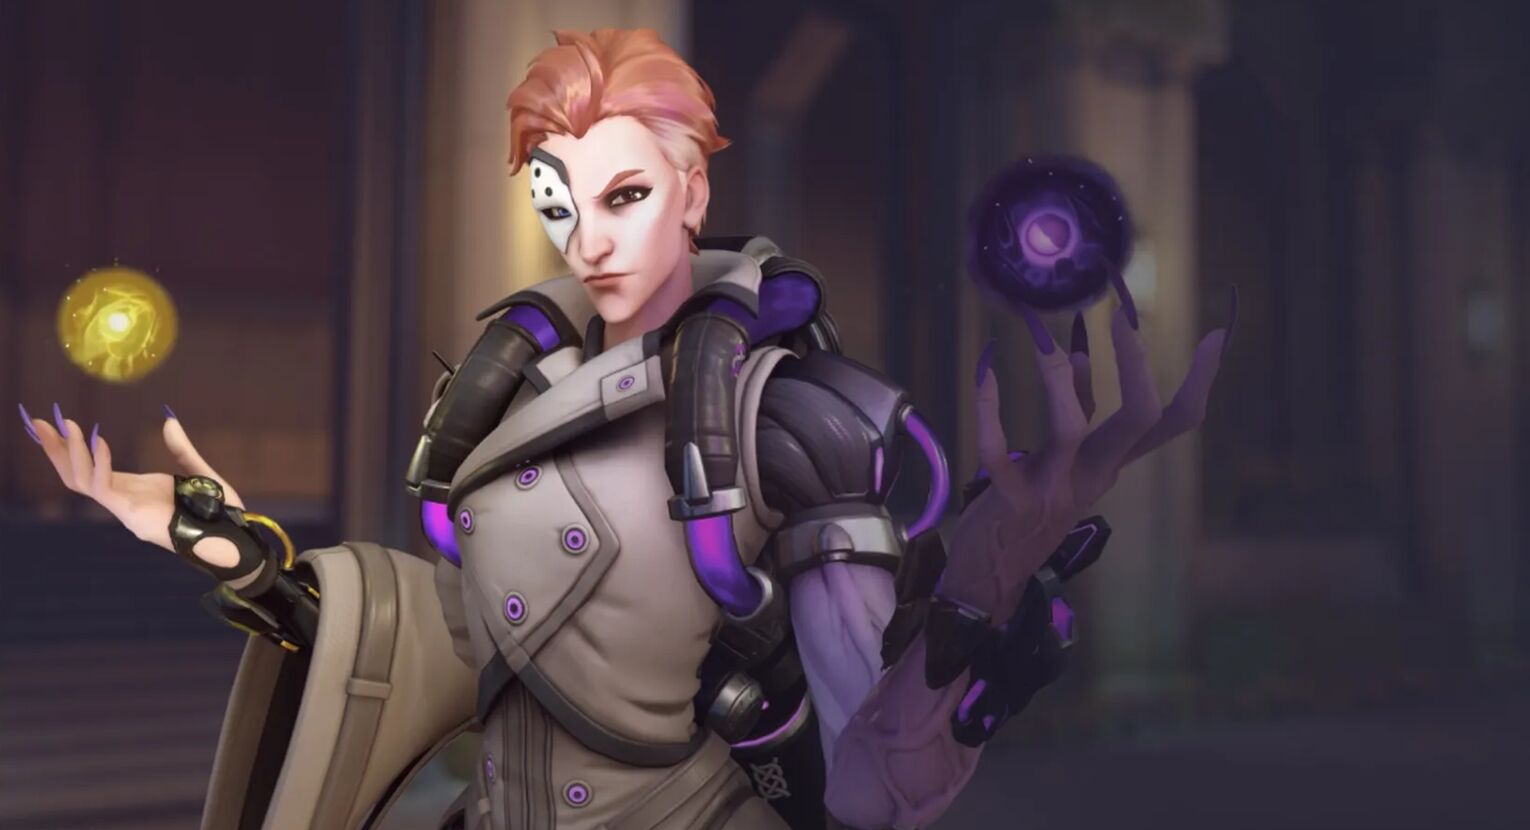 Moira as counter to Symmetra in Overwatch 2